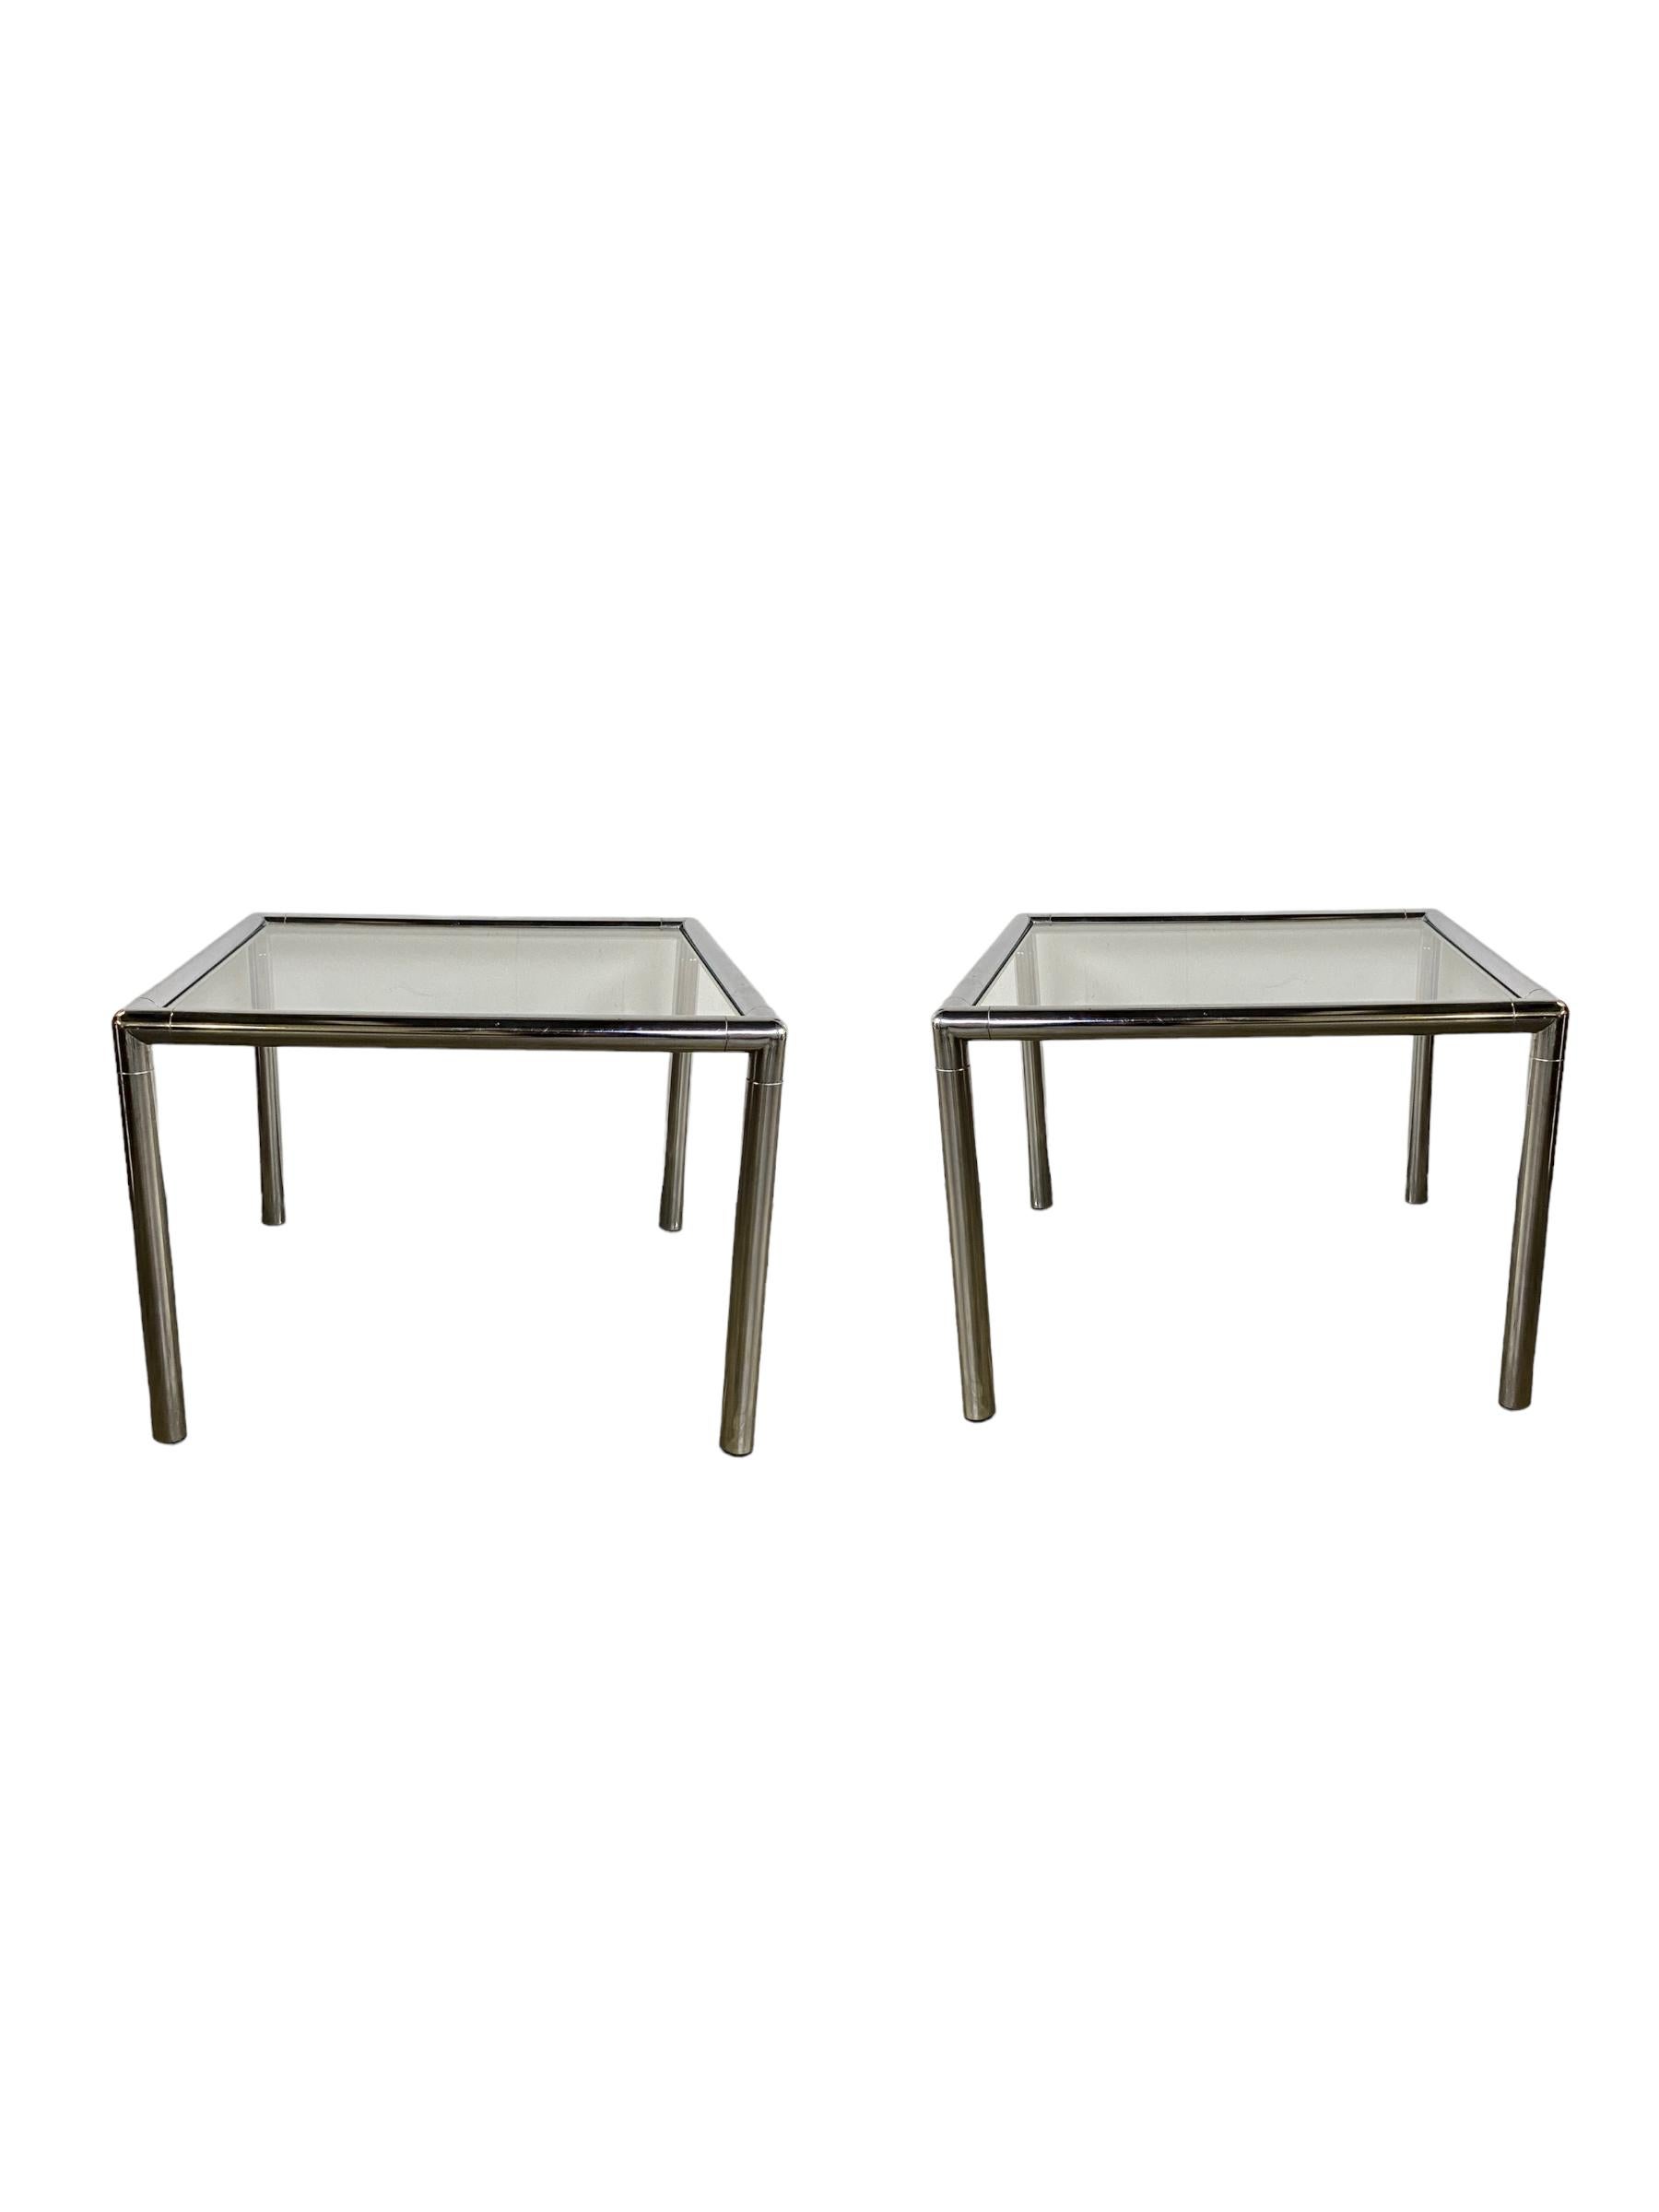 Pair of Chrome square end tables with clear glass insert. Chrome is in good condition, no pitting or rust. Glass is new and has no scratches or chips. Post mid century modern sleek design. Tubular chrome frame and glass table surface.